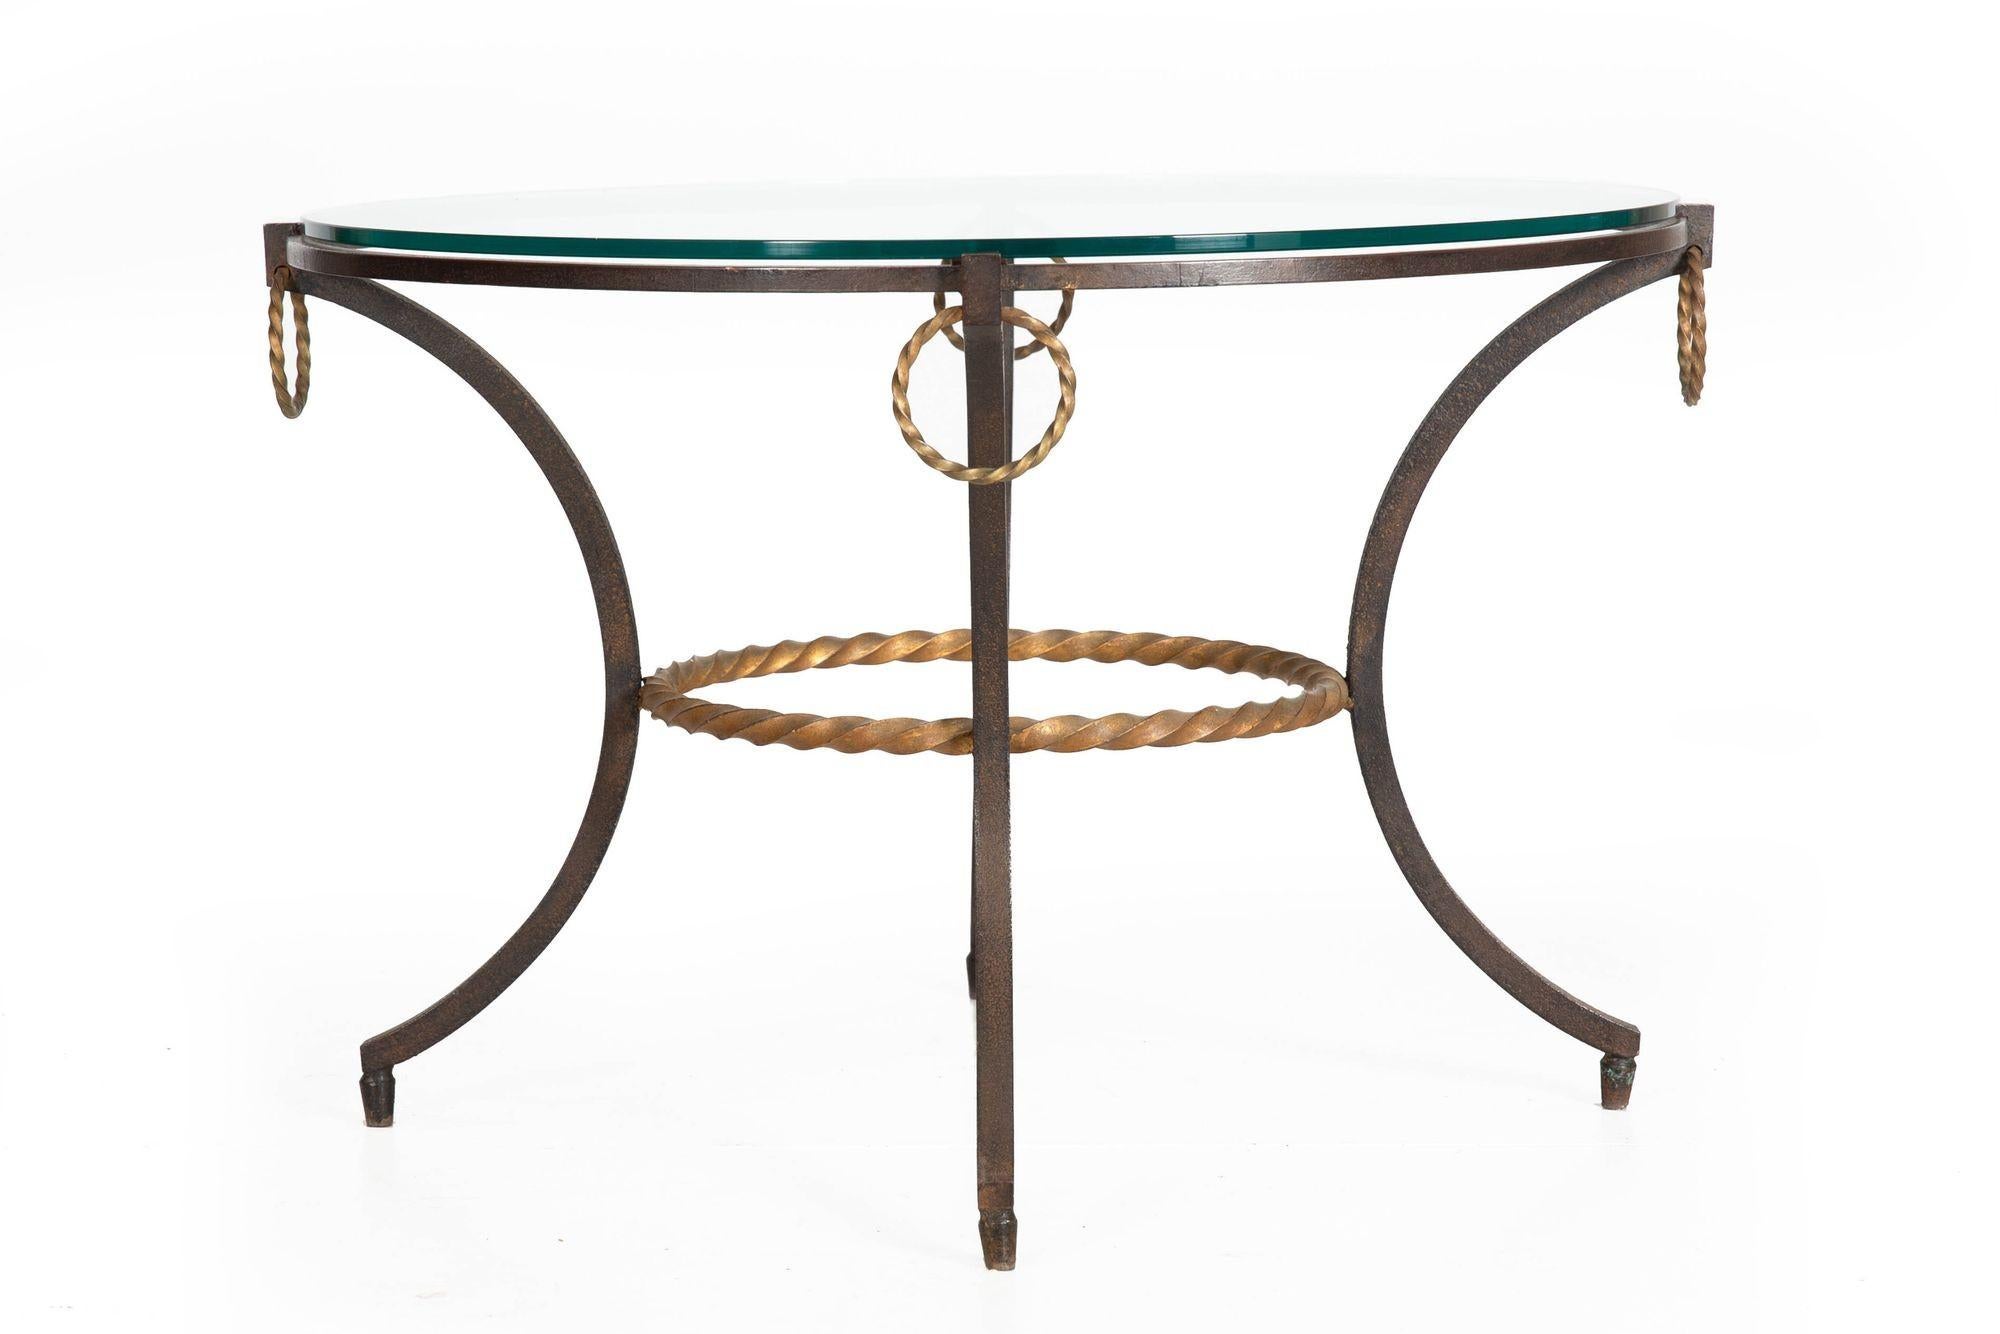 20th Century French Modernist Wrought-Iron & Glass Cocktail Side Coffee Table ca. 1950s For Sale